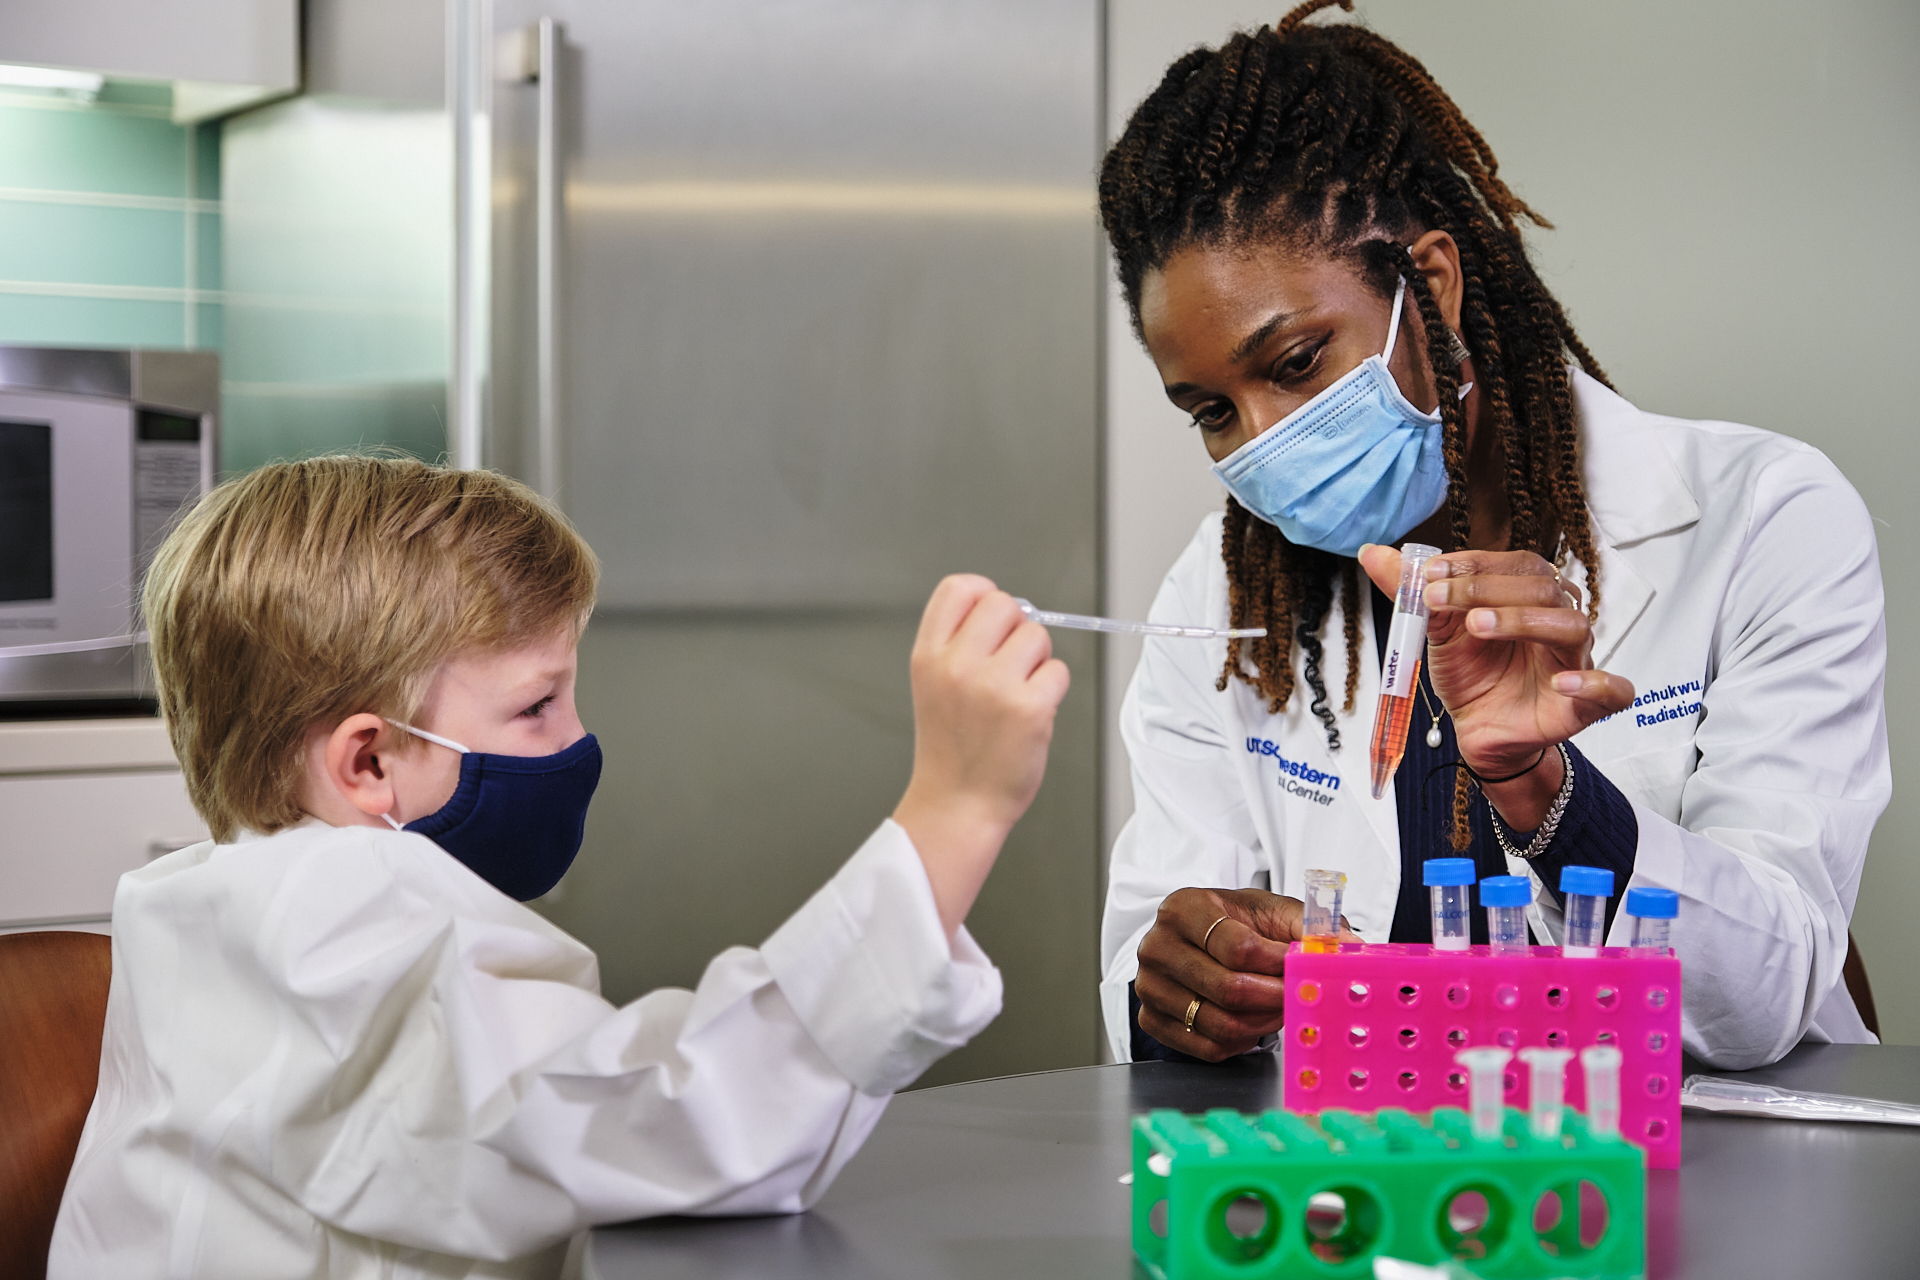 Dr. Chika Nwachukwu showing Hudson Dietz how to do her take-home experiment. Dr. Nwachukwu was awarded an early-stage research grant in support of emerging medical discoveries.